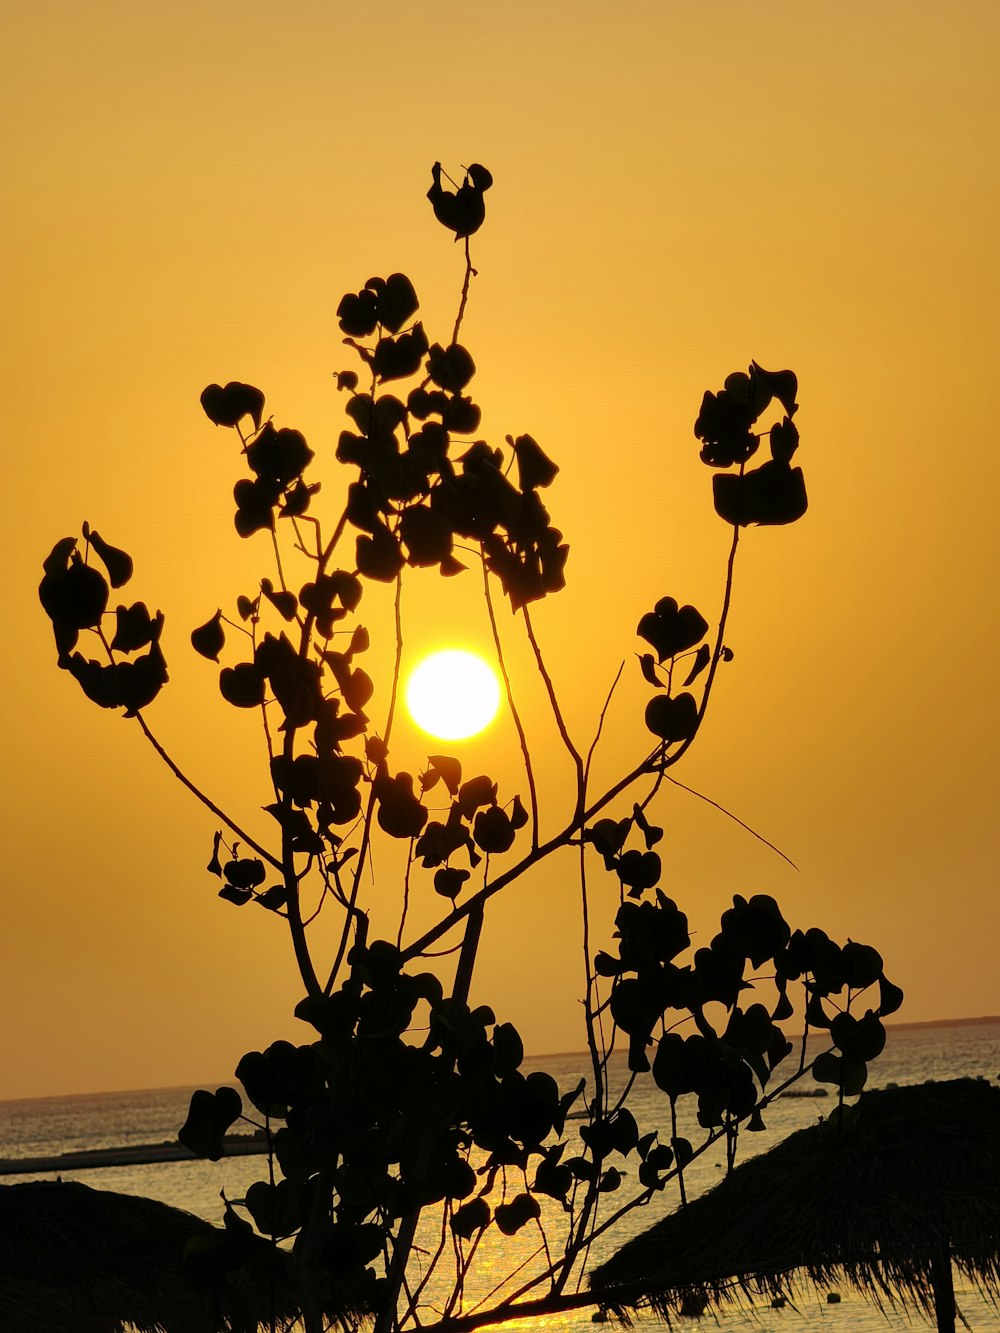 the sun is setting over the ocean with a tree in the foreground